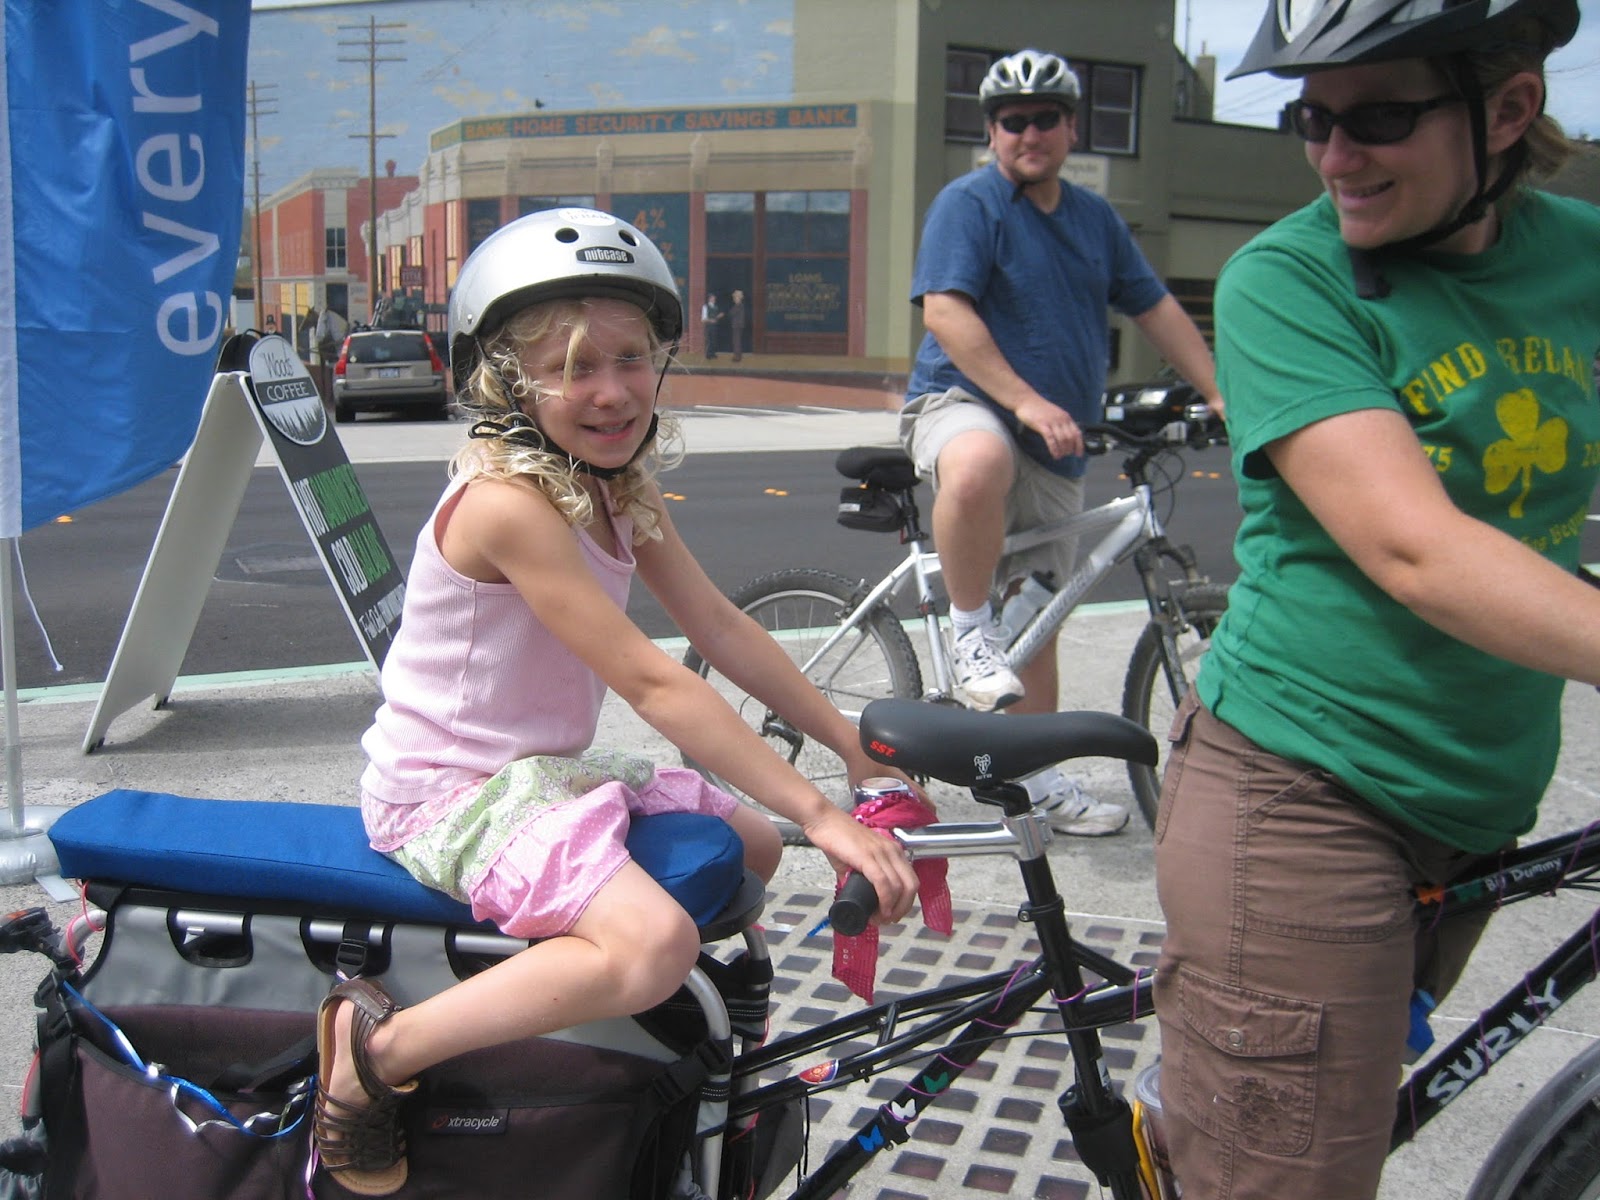 Carrying Kids on Bikes: A Local Bicyclist Chimes In With Her Experiences - WhatcomTalk